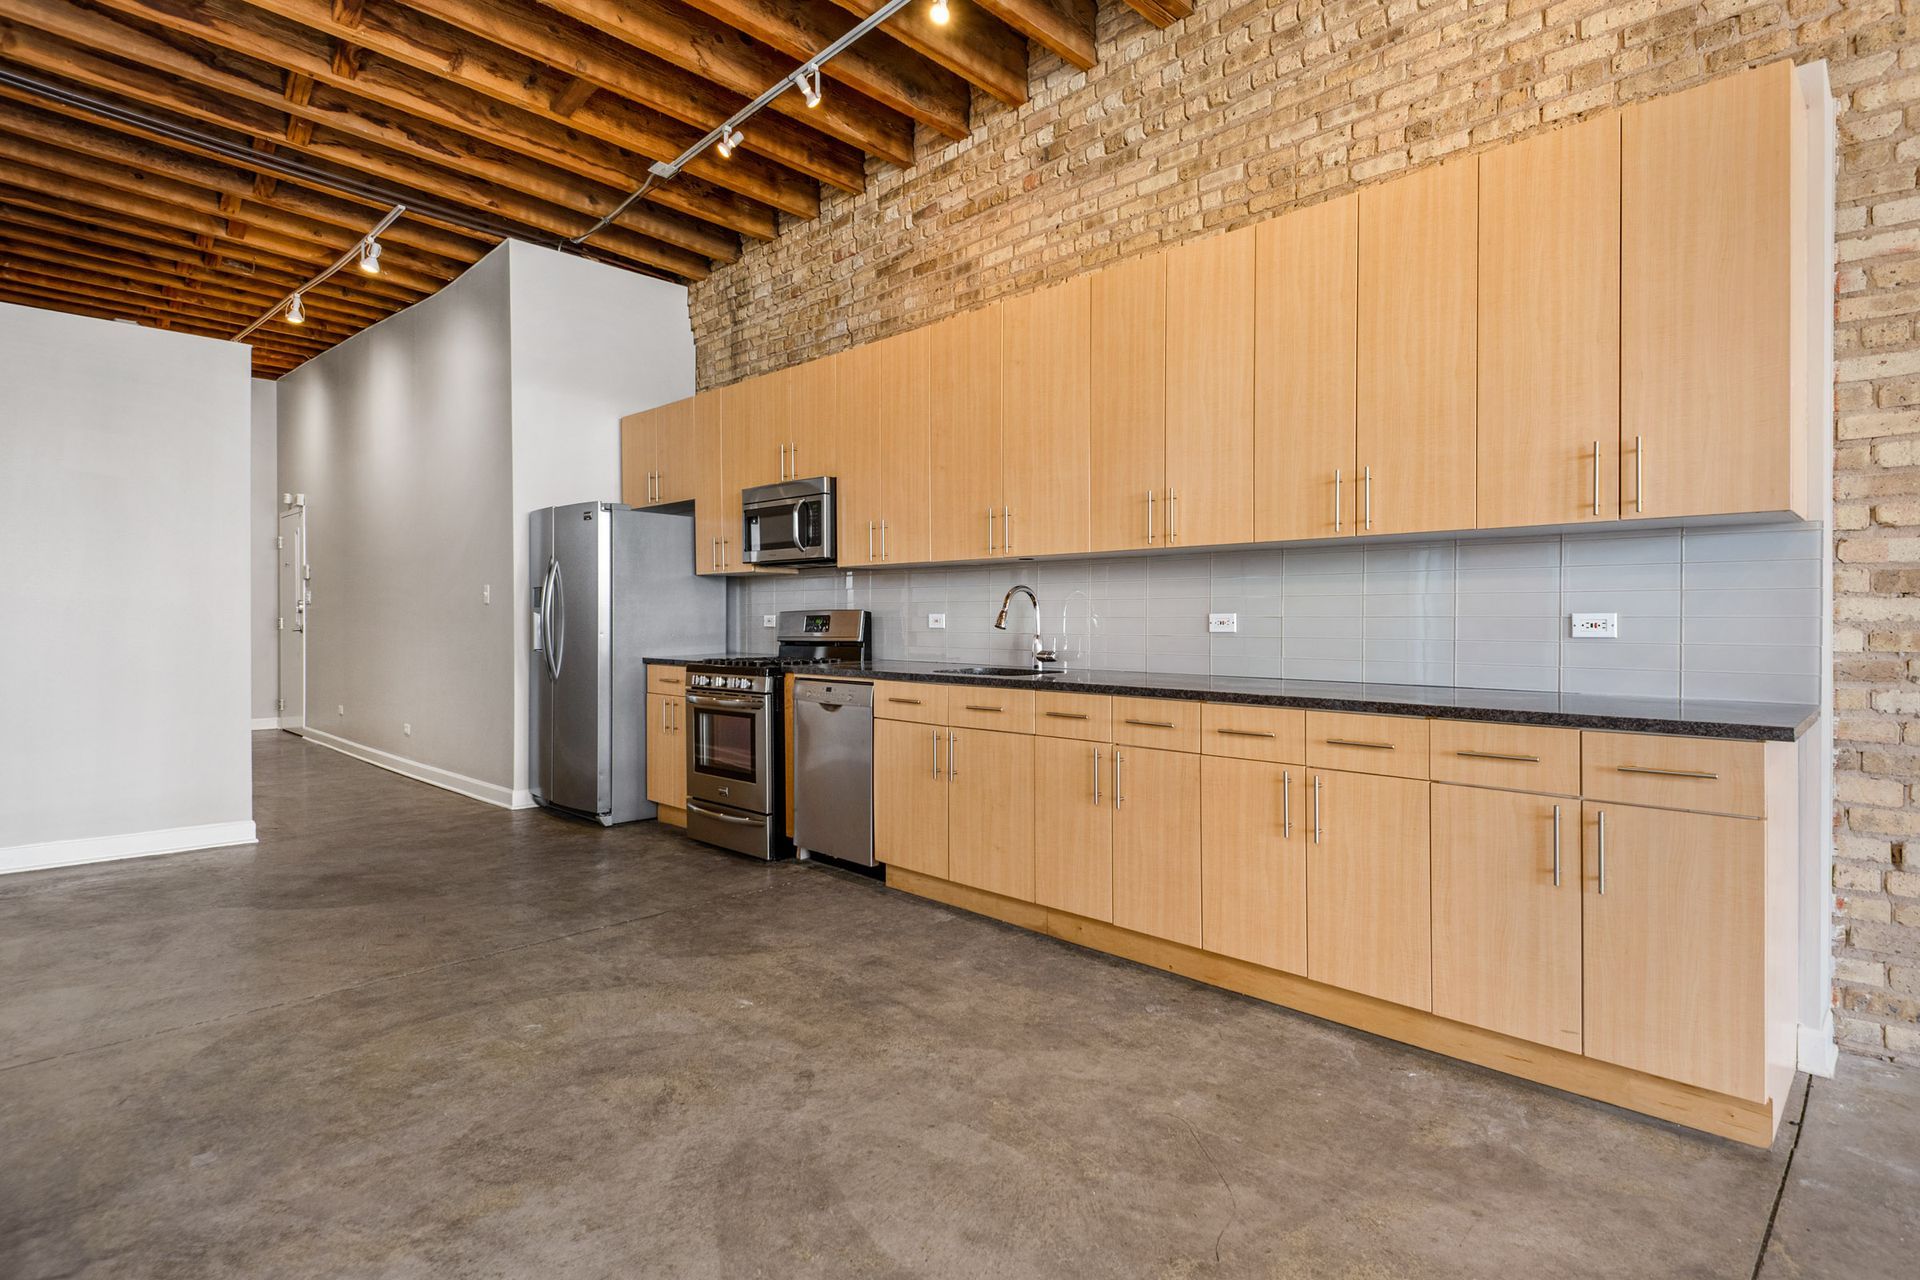 Spacious kitchen with wooden cabinets, stainless steel appliances, and a brick wall at 945 W Fulton Market Apartments.